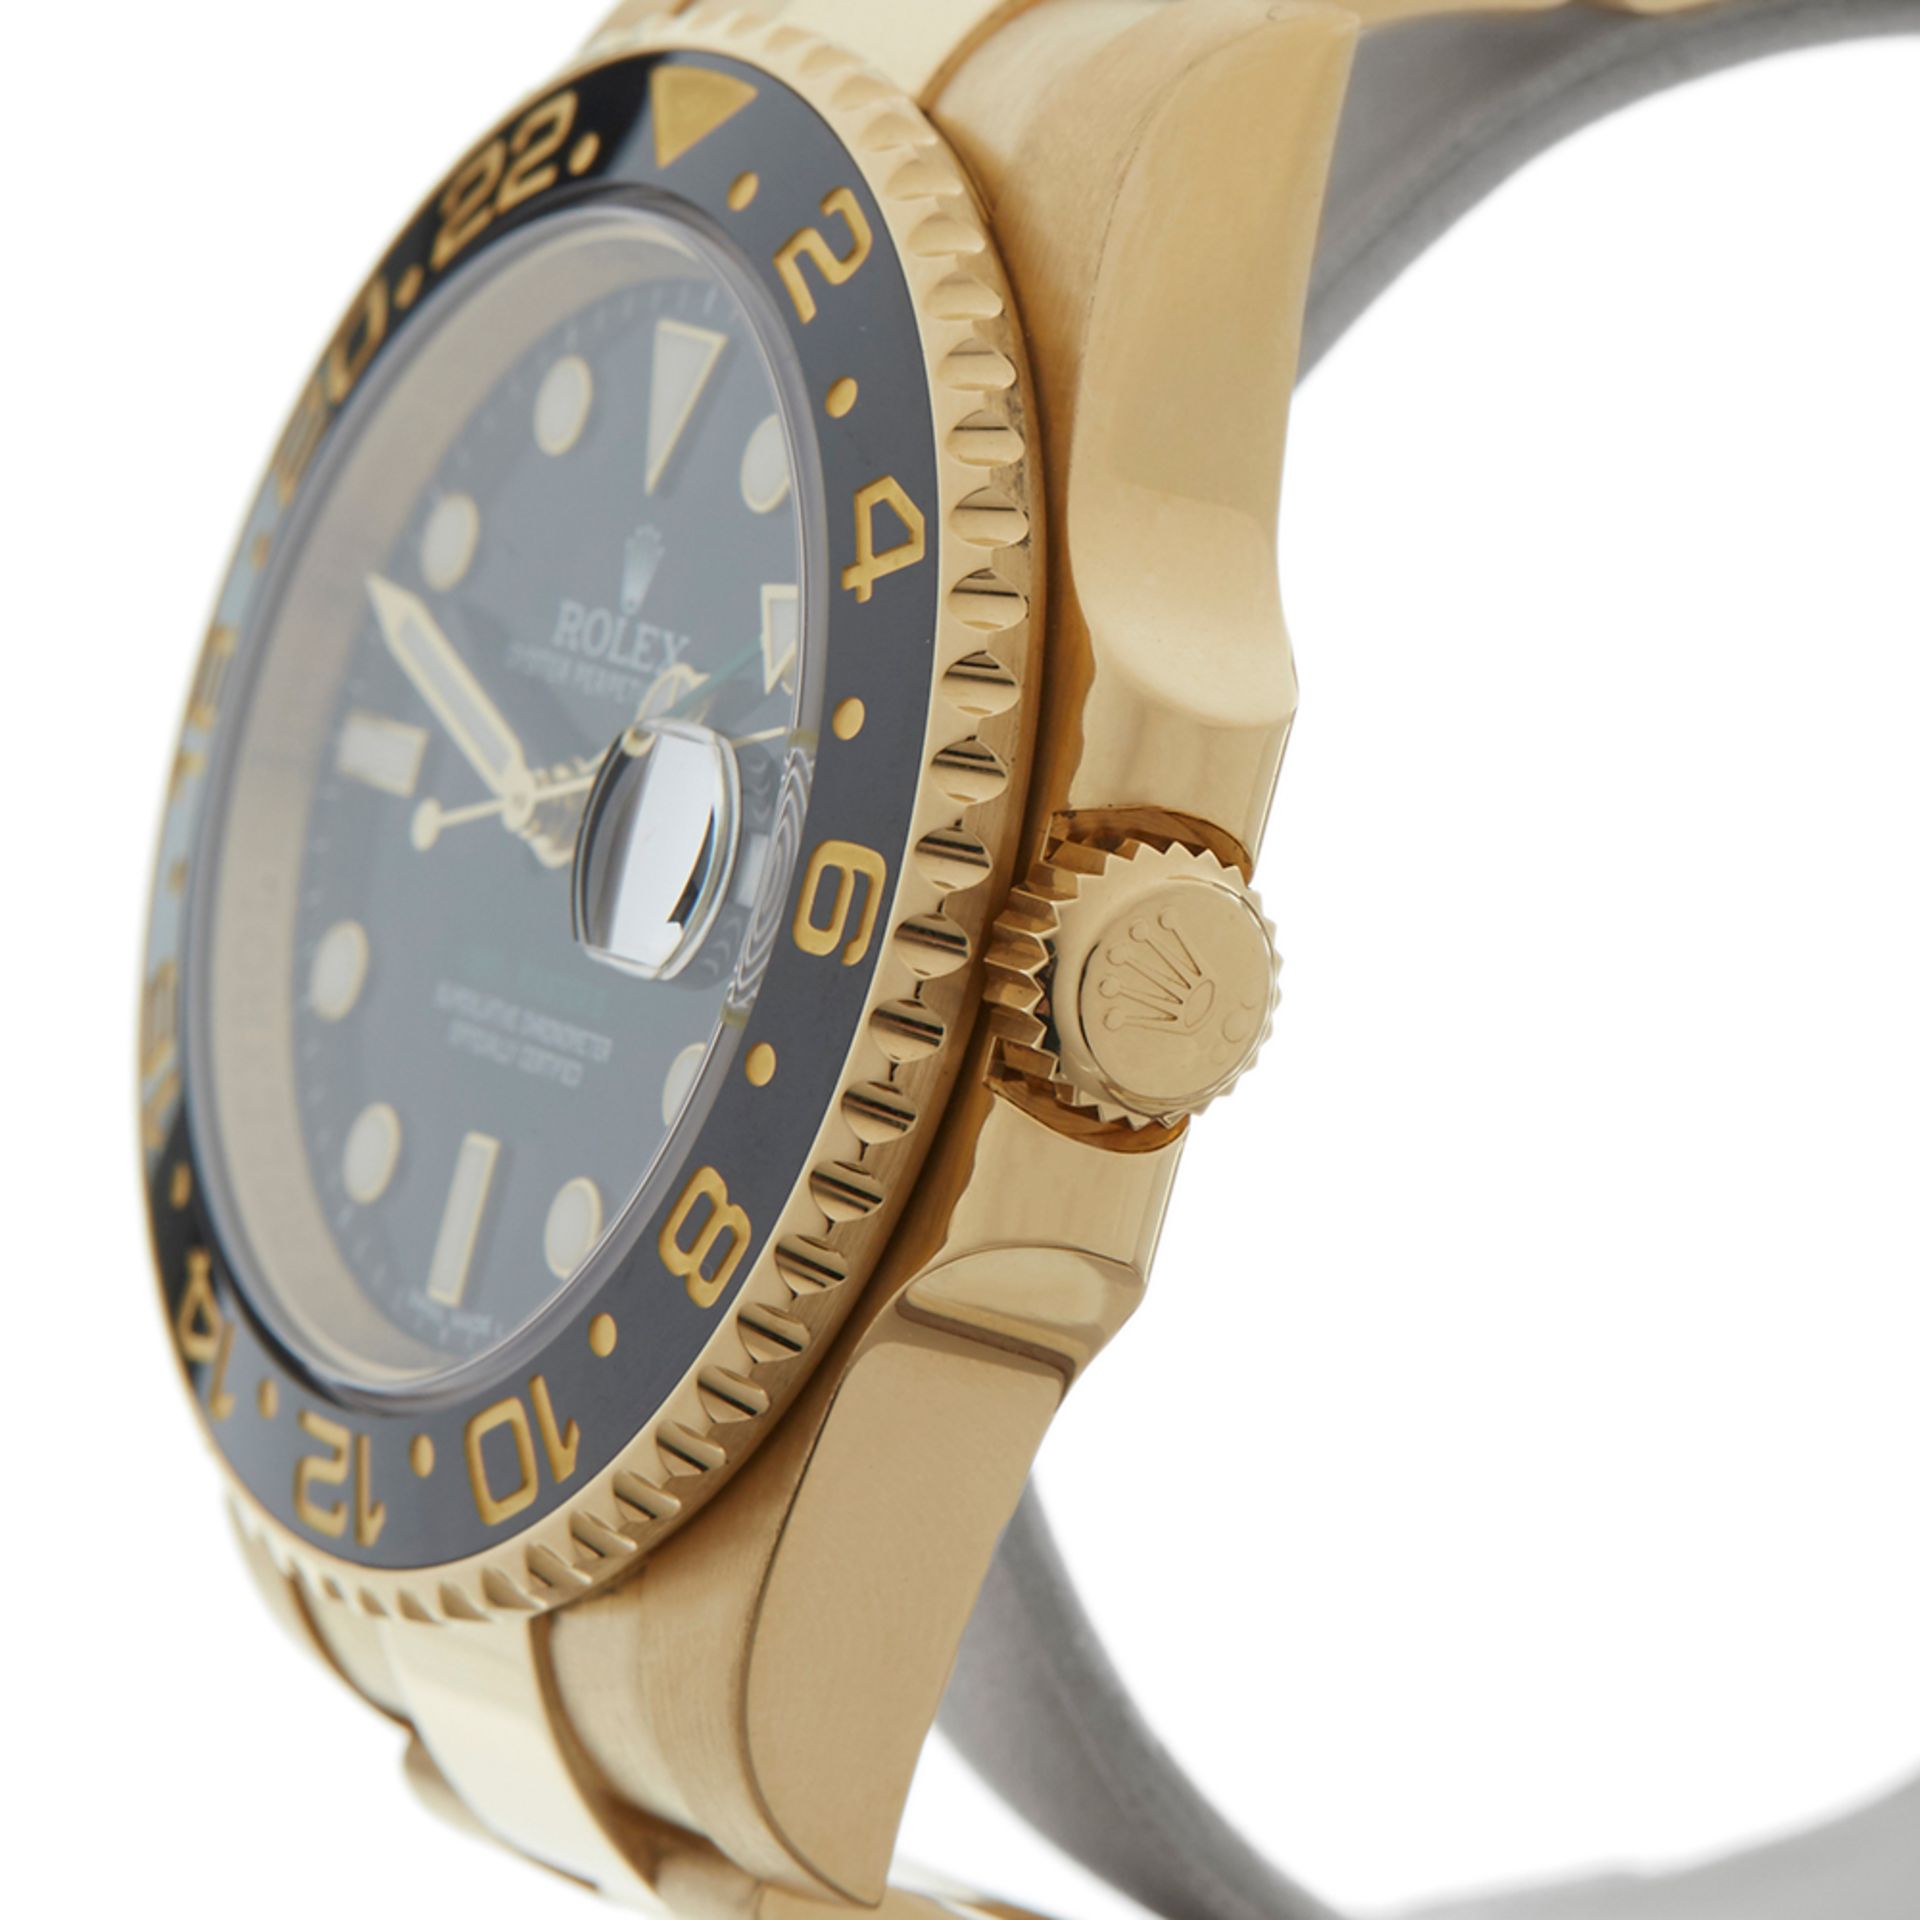 Rolex, GMT-Master II 40mm 18k Yellow Gold 116718LN - Image 4 of 9